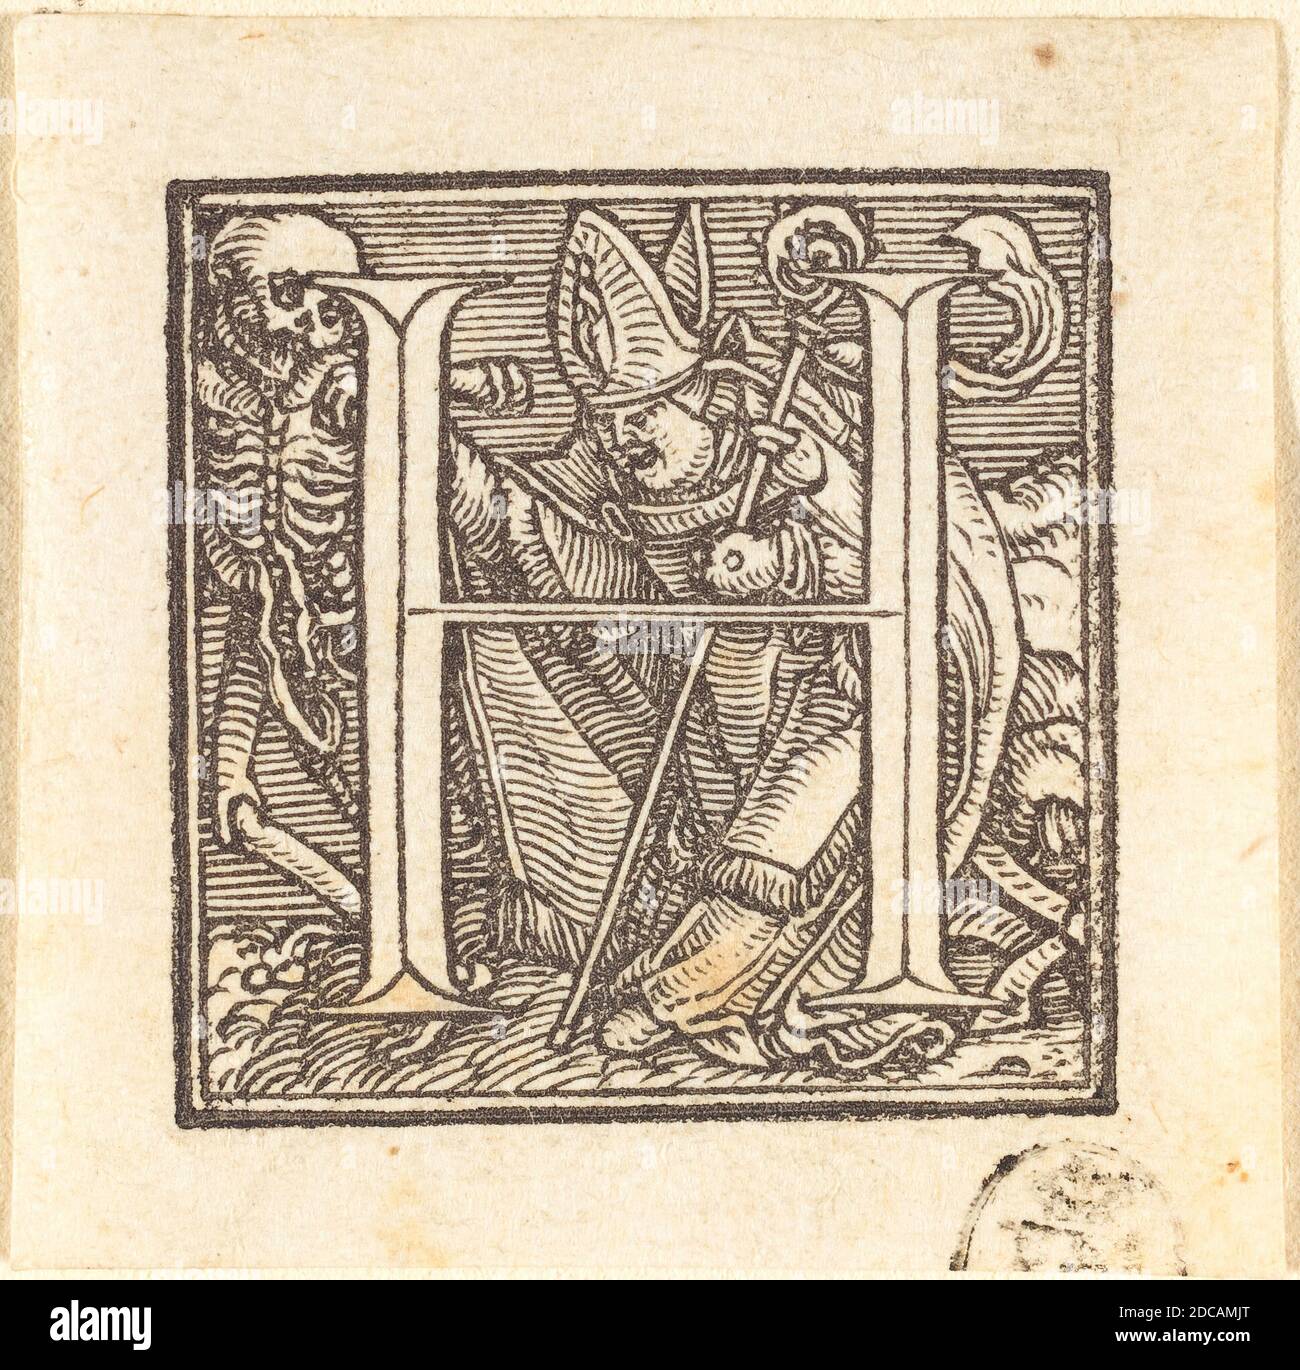 Hans Holbein the Younger, (artist), German, 1497/1498 - 1543, Letter H, Alphabet of Death, (series), woodcut Stock Photo